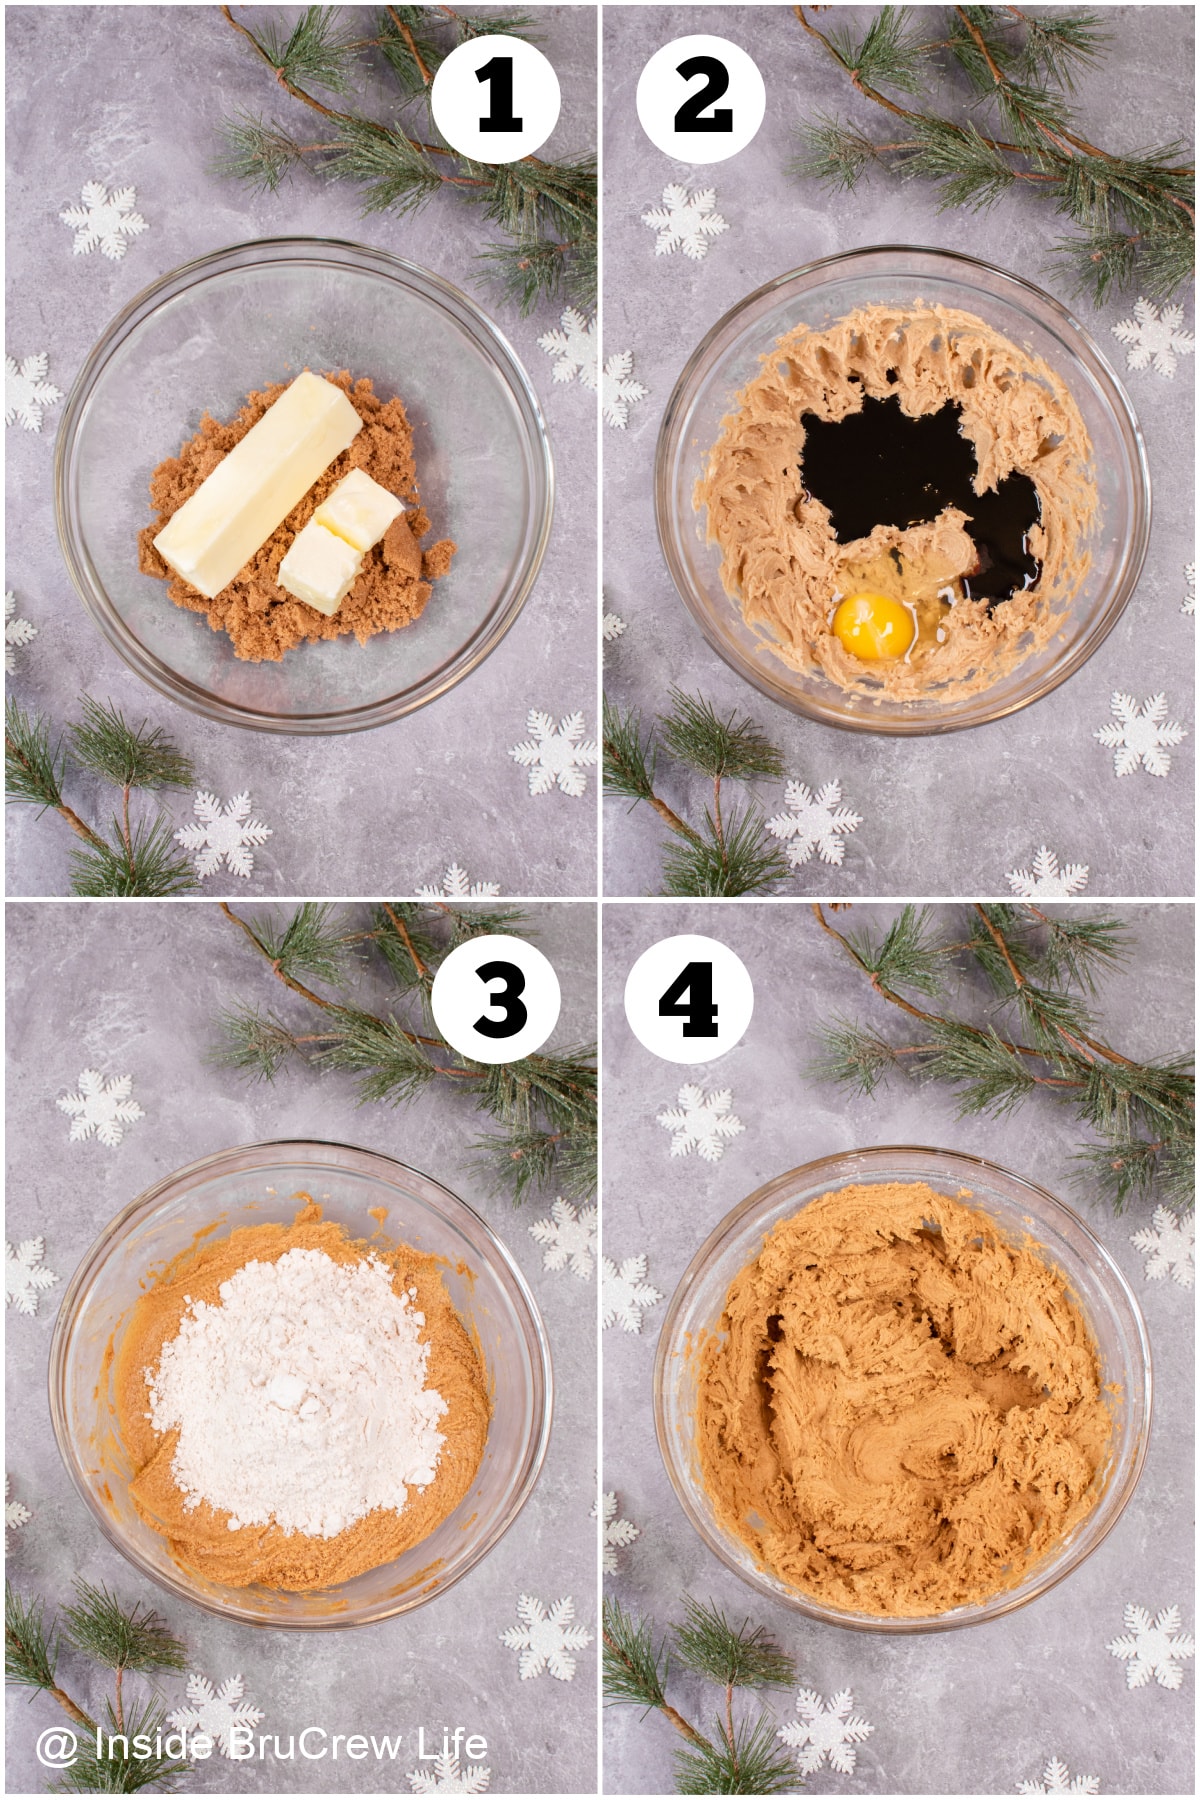 A collage of 4 pictures showing how to make gingerbread dough.